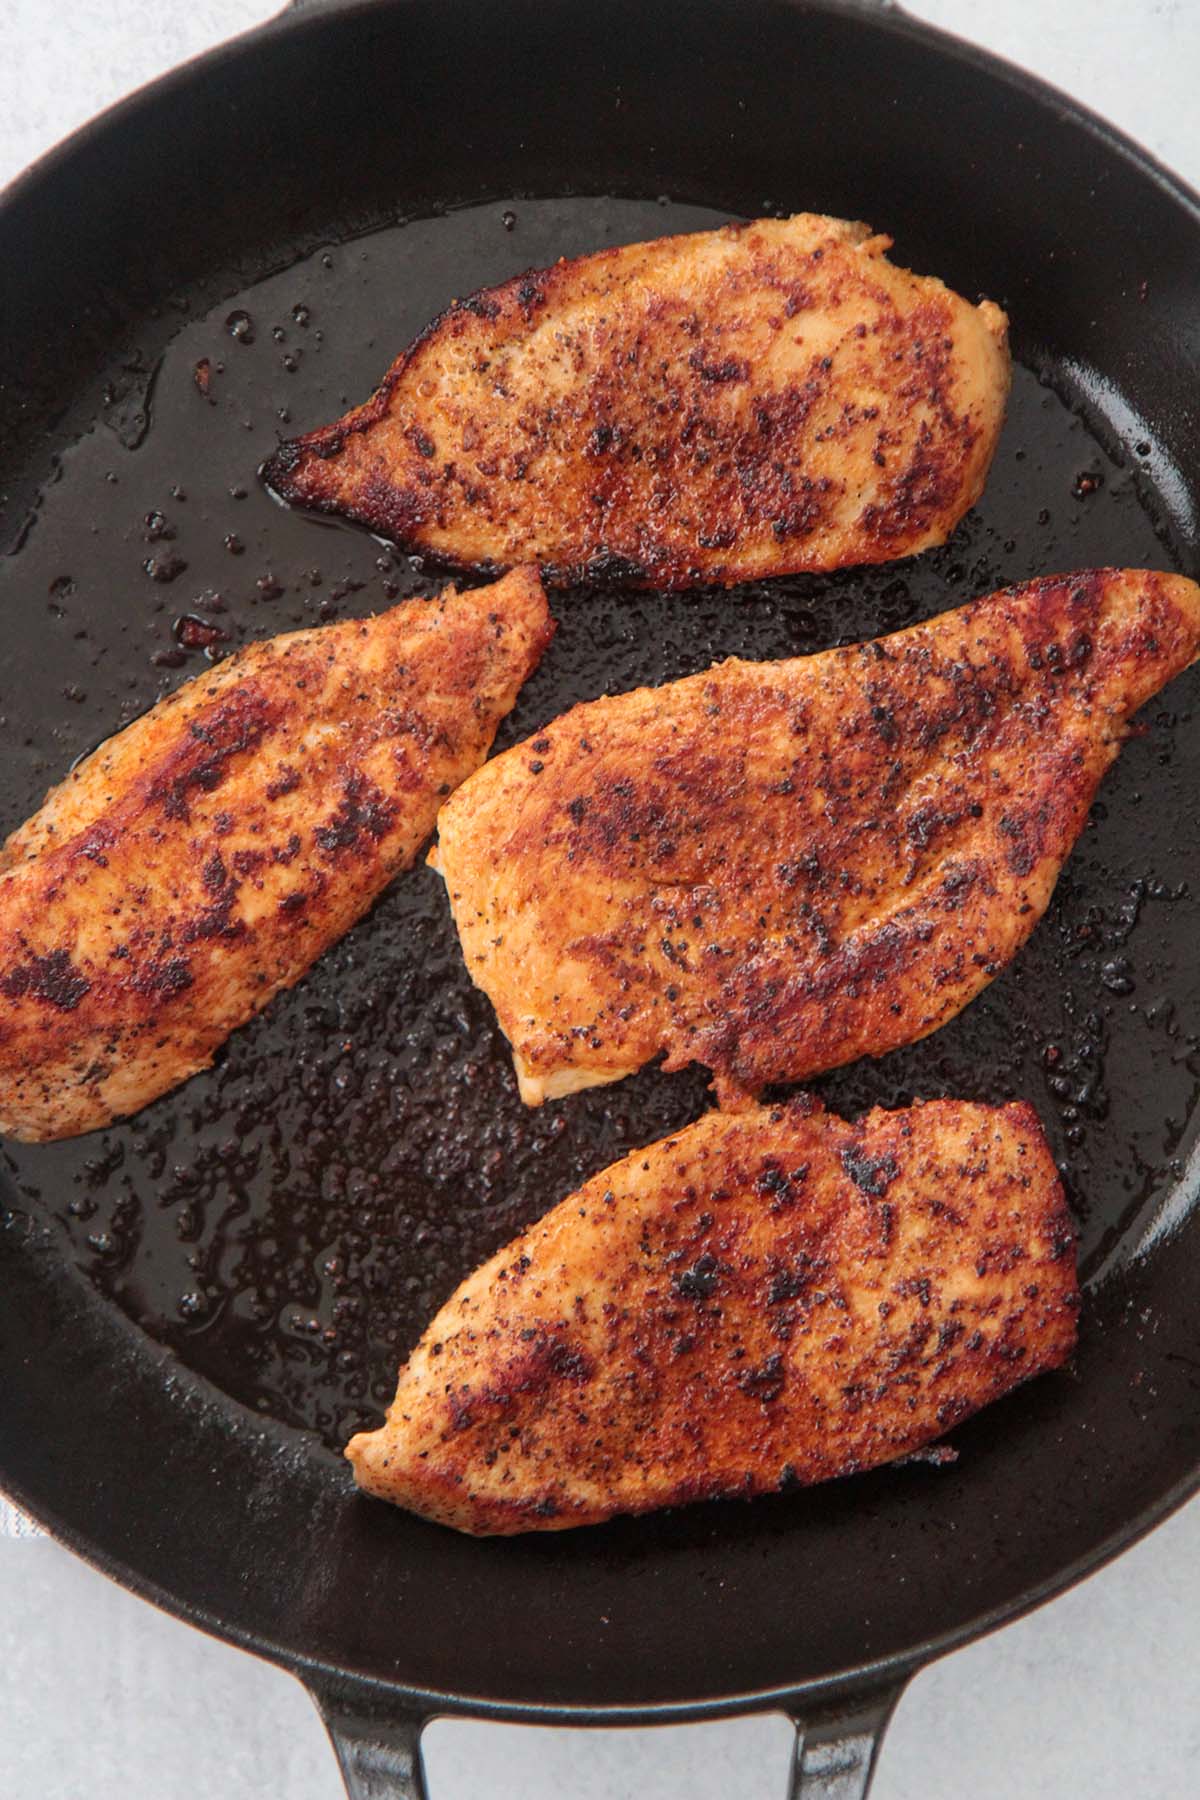 4 cooked chicken breasts in a skillet.